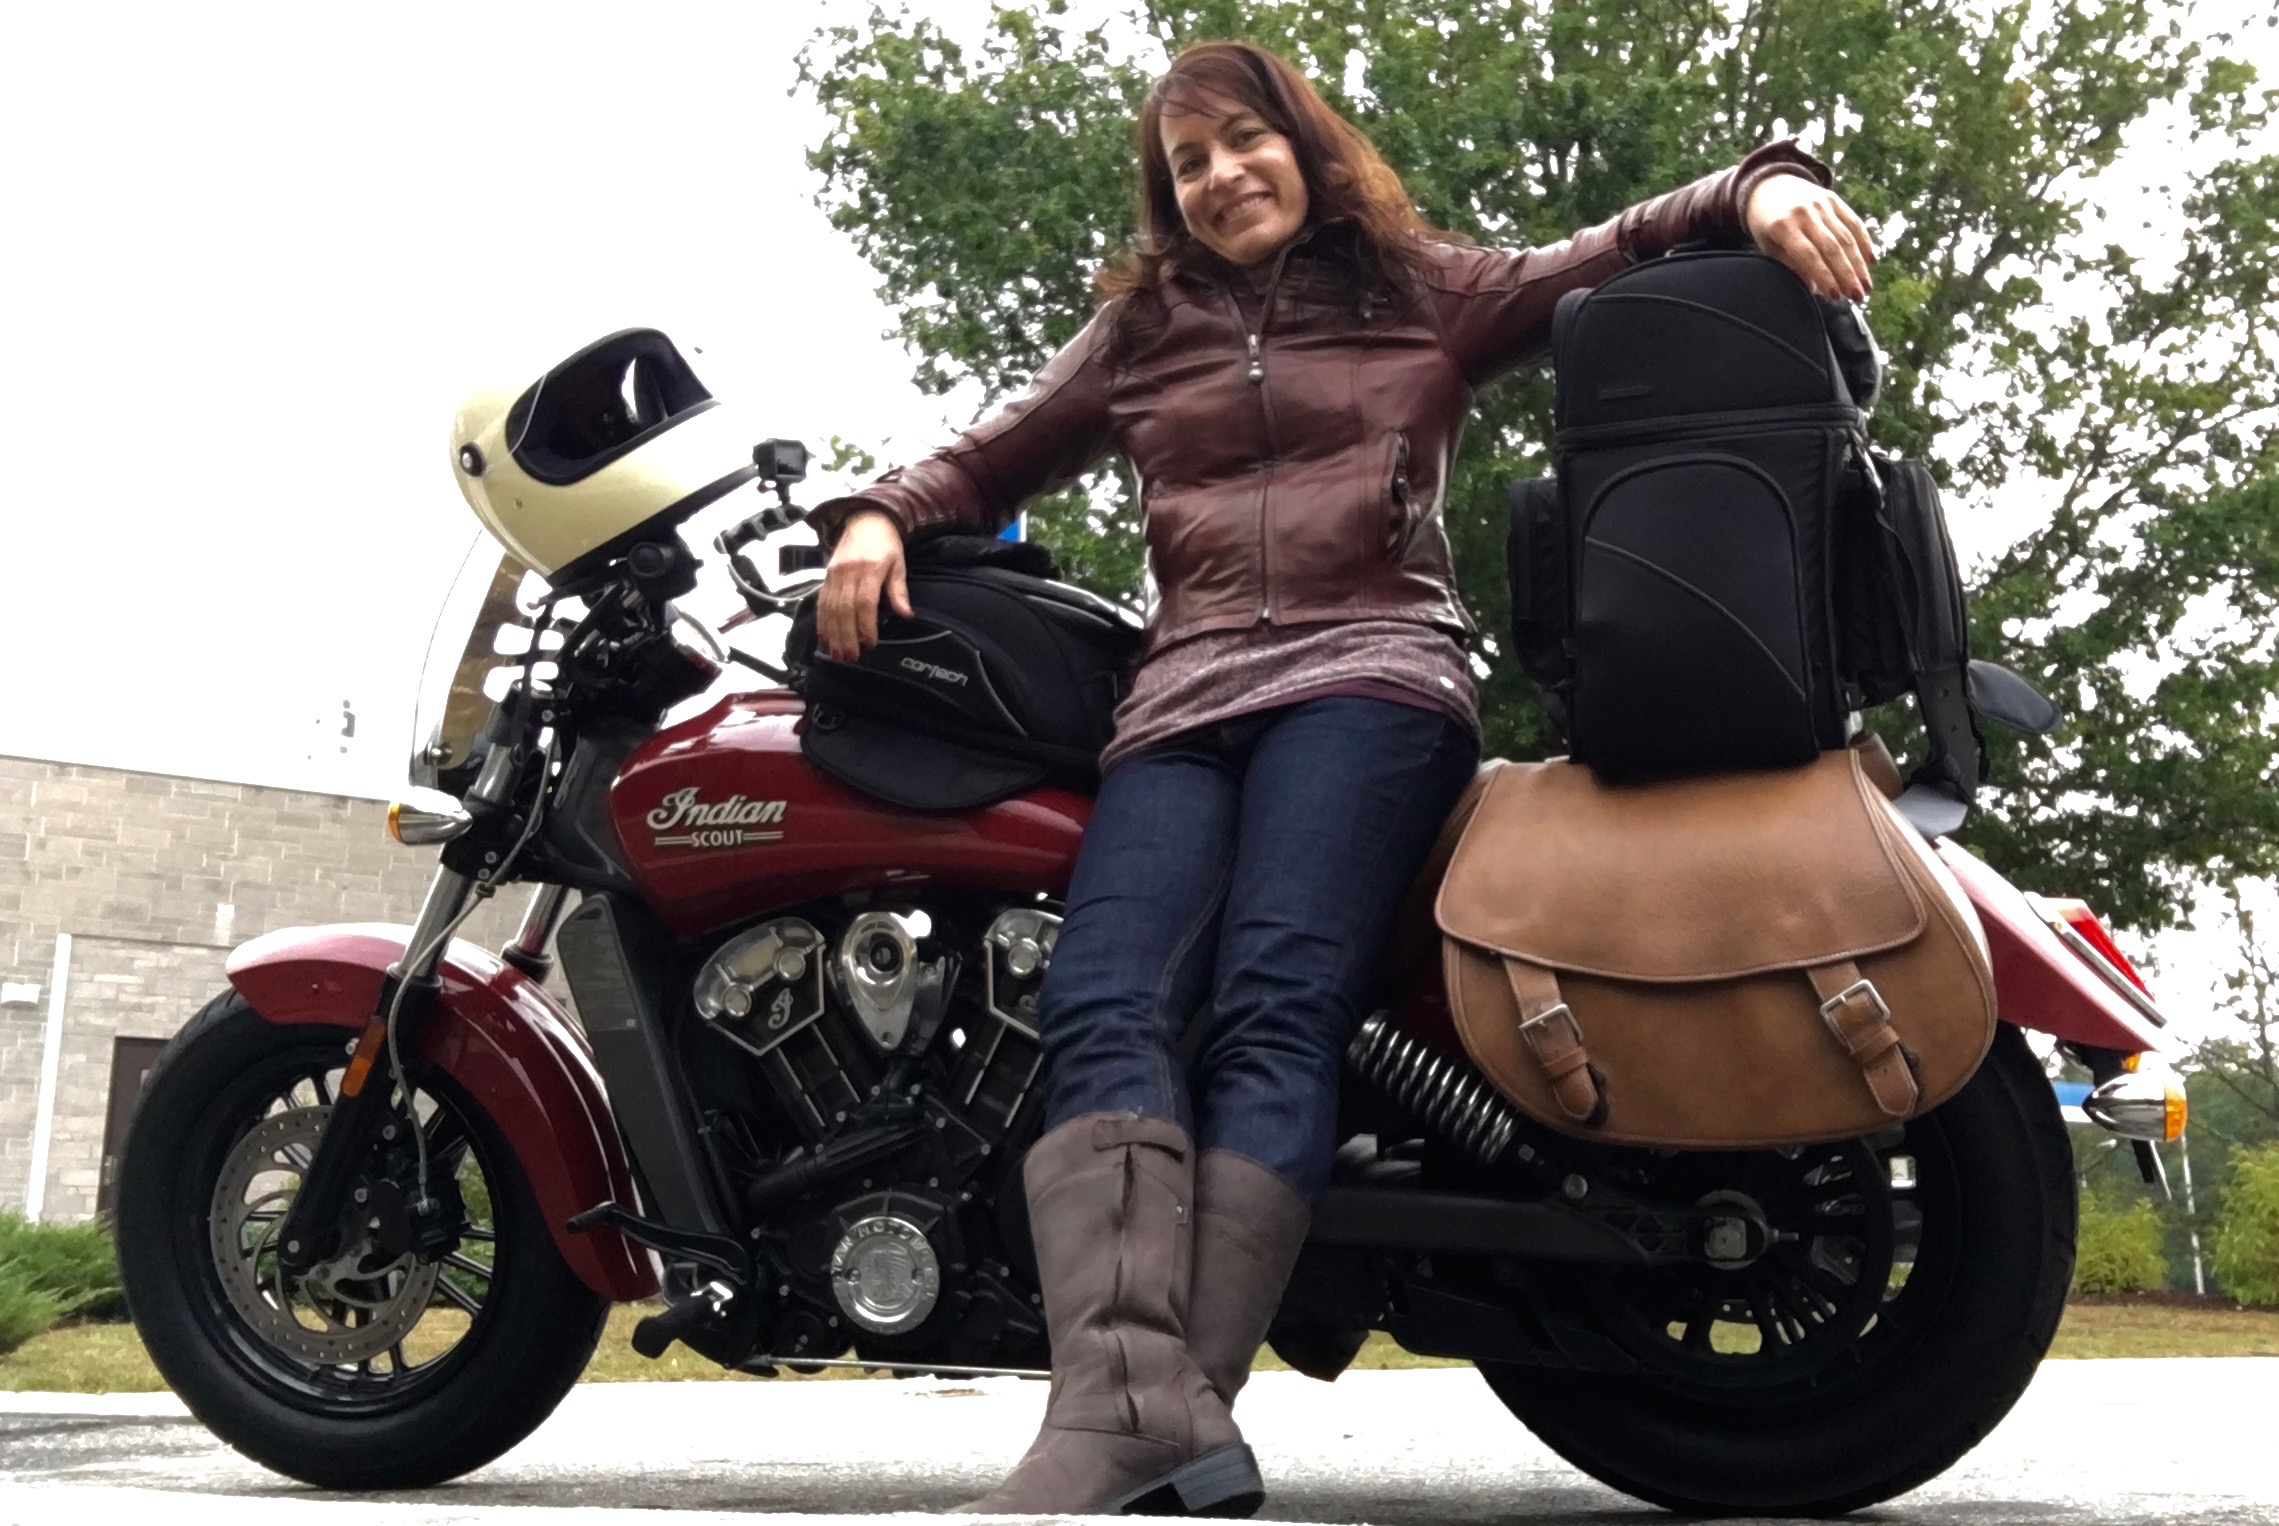 Creating Camaraderie on a Solo Motorcycle Journey with Indy Saini